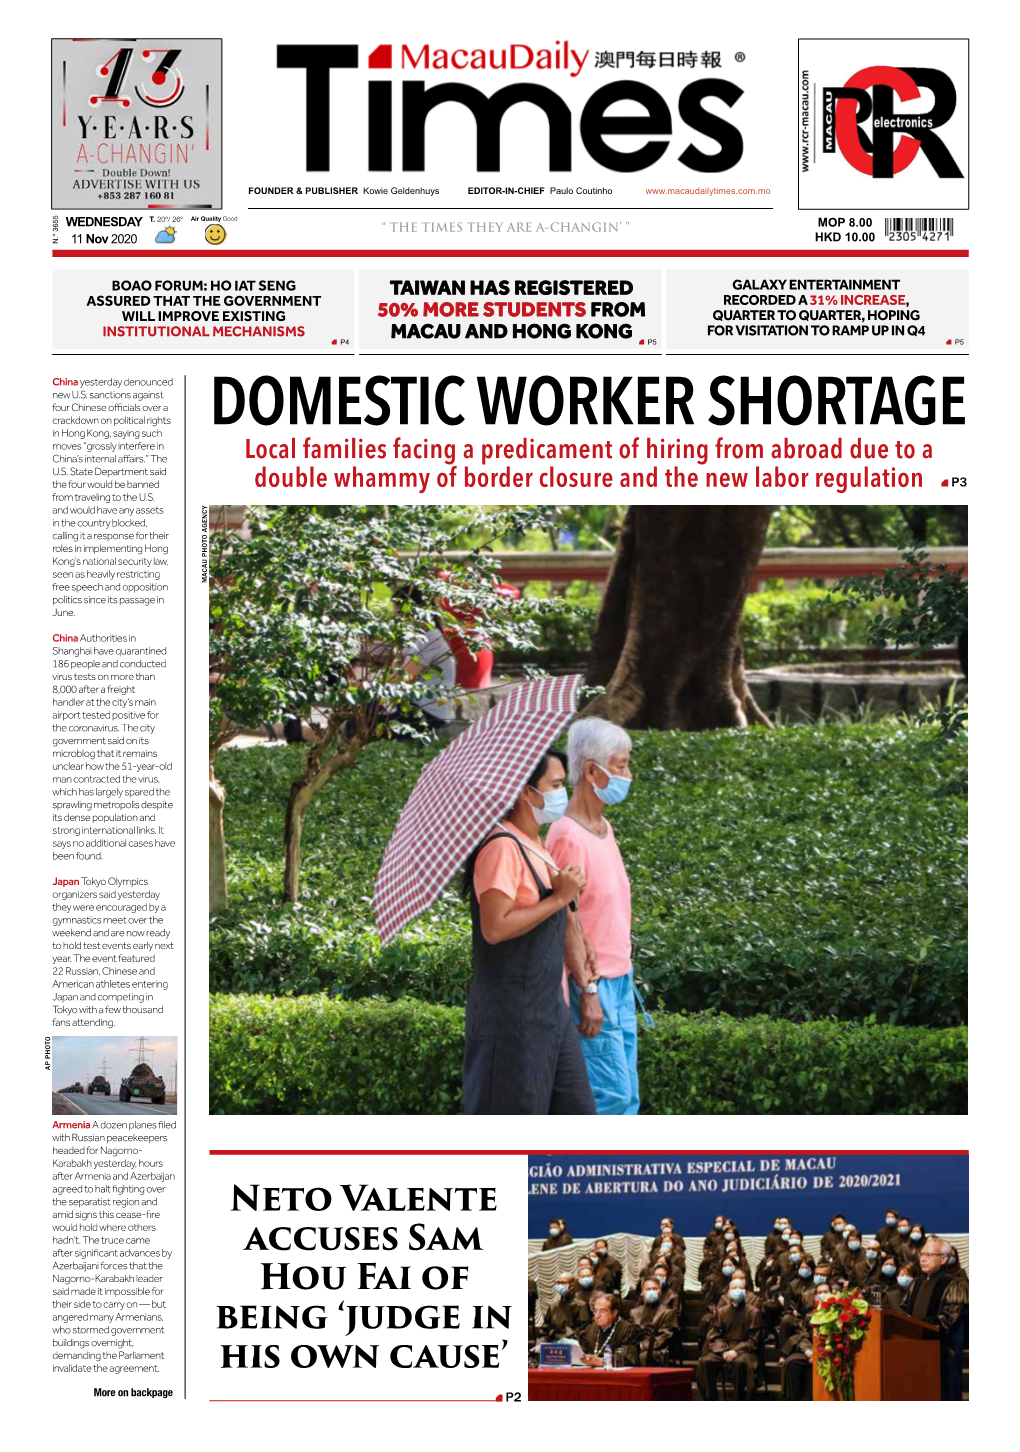 DOMESTIC WORKER SHORTAGE China’S Internal Affairs.” the Local Families Facing a Predicament of Hiring from Abroad Due to a U.S